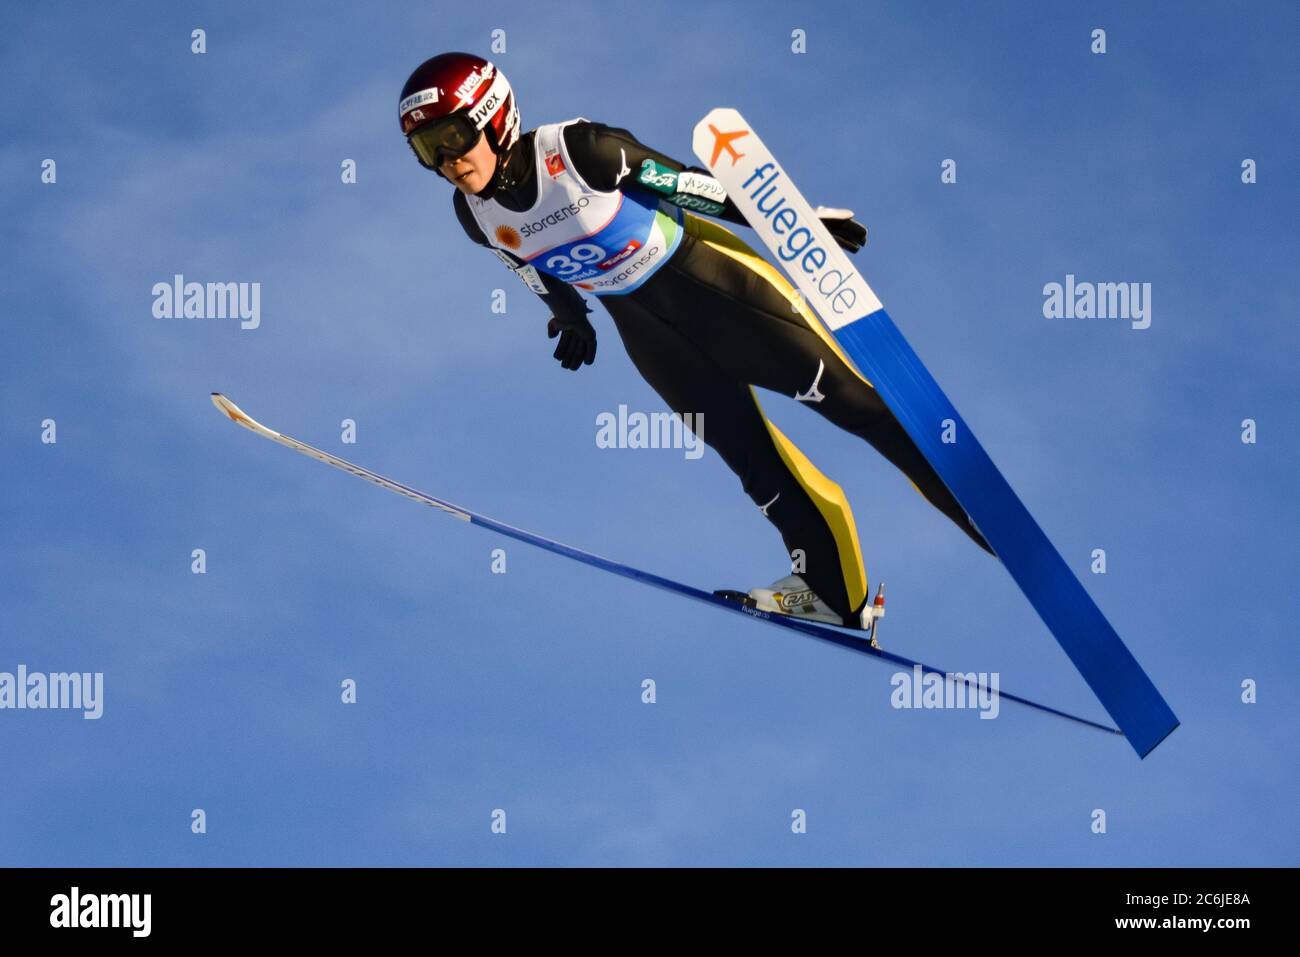 Ski jumpers jump from the large hill at the Nordic World Championships, Seefeld, Austria, 2019. Stock Photo